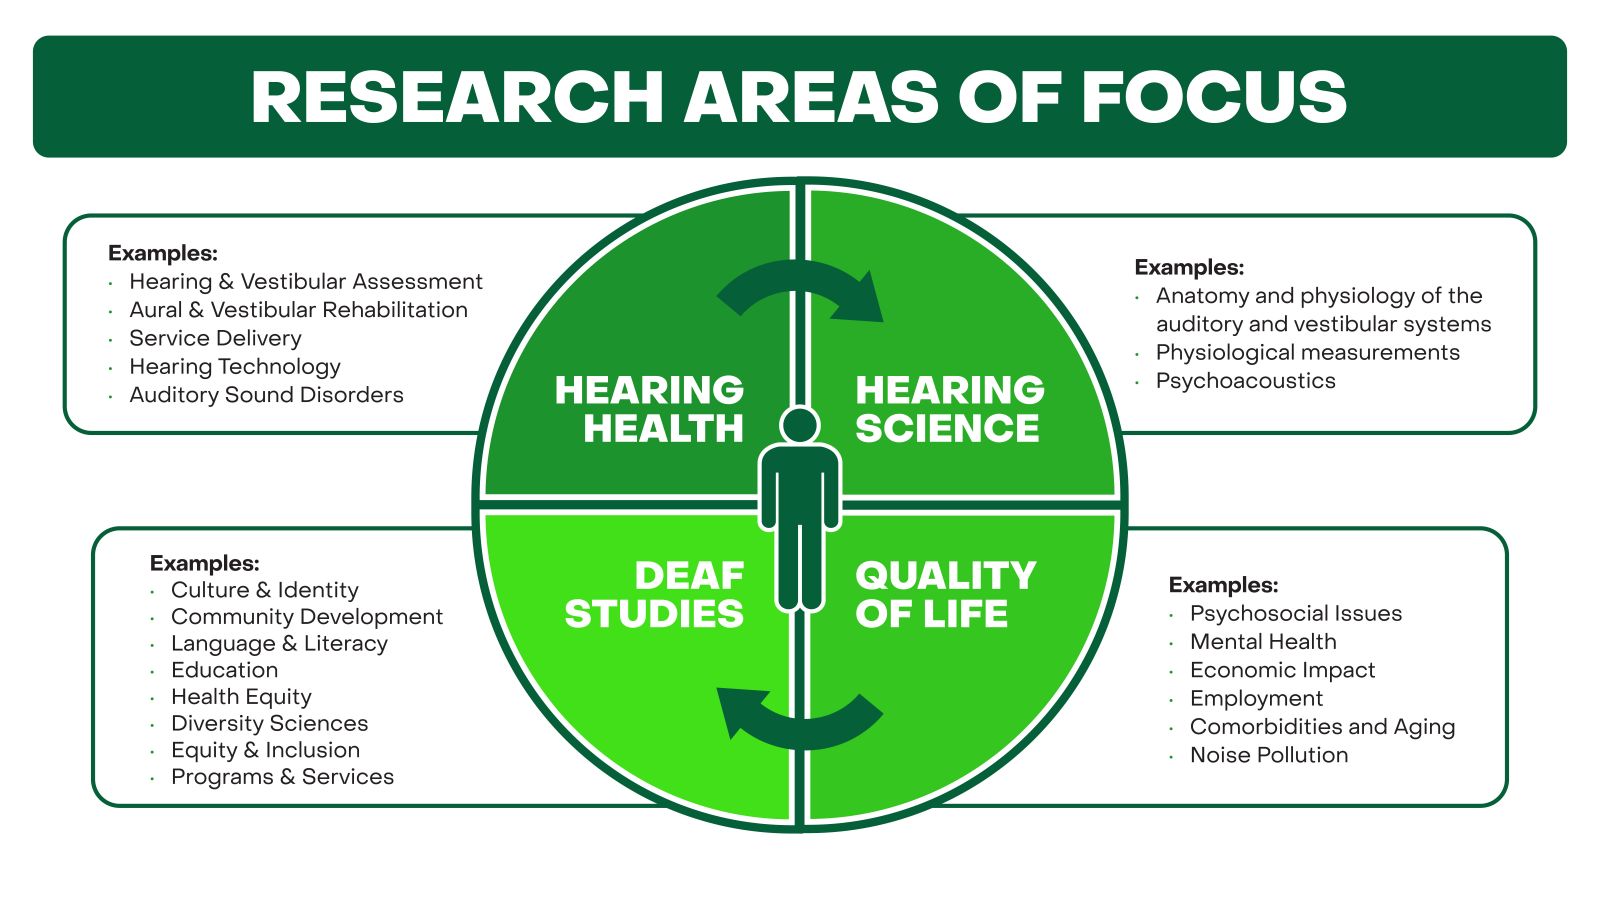 Research Areas of Focus chart